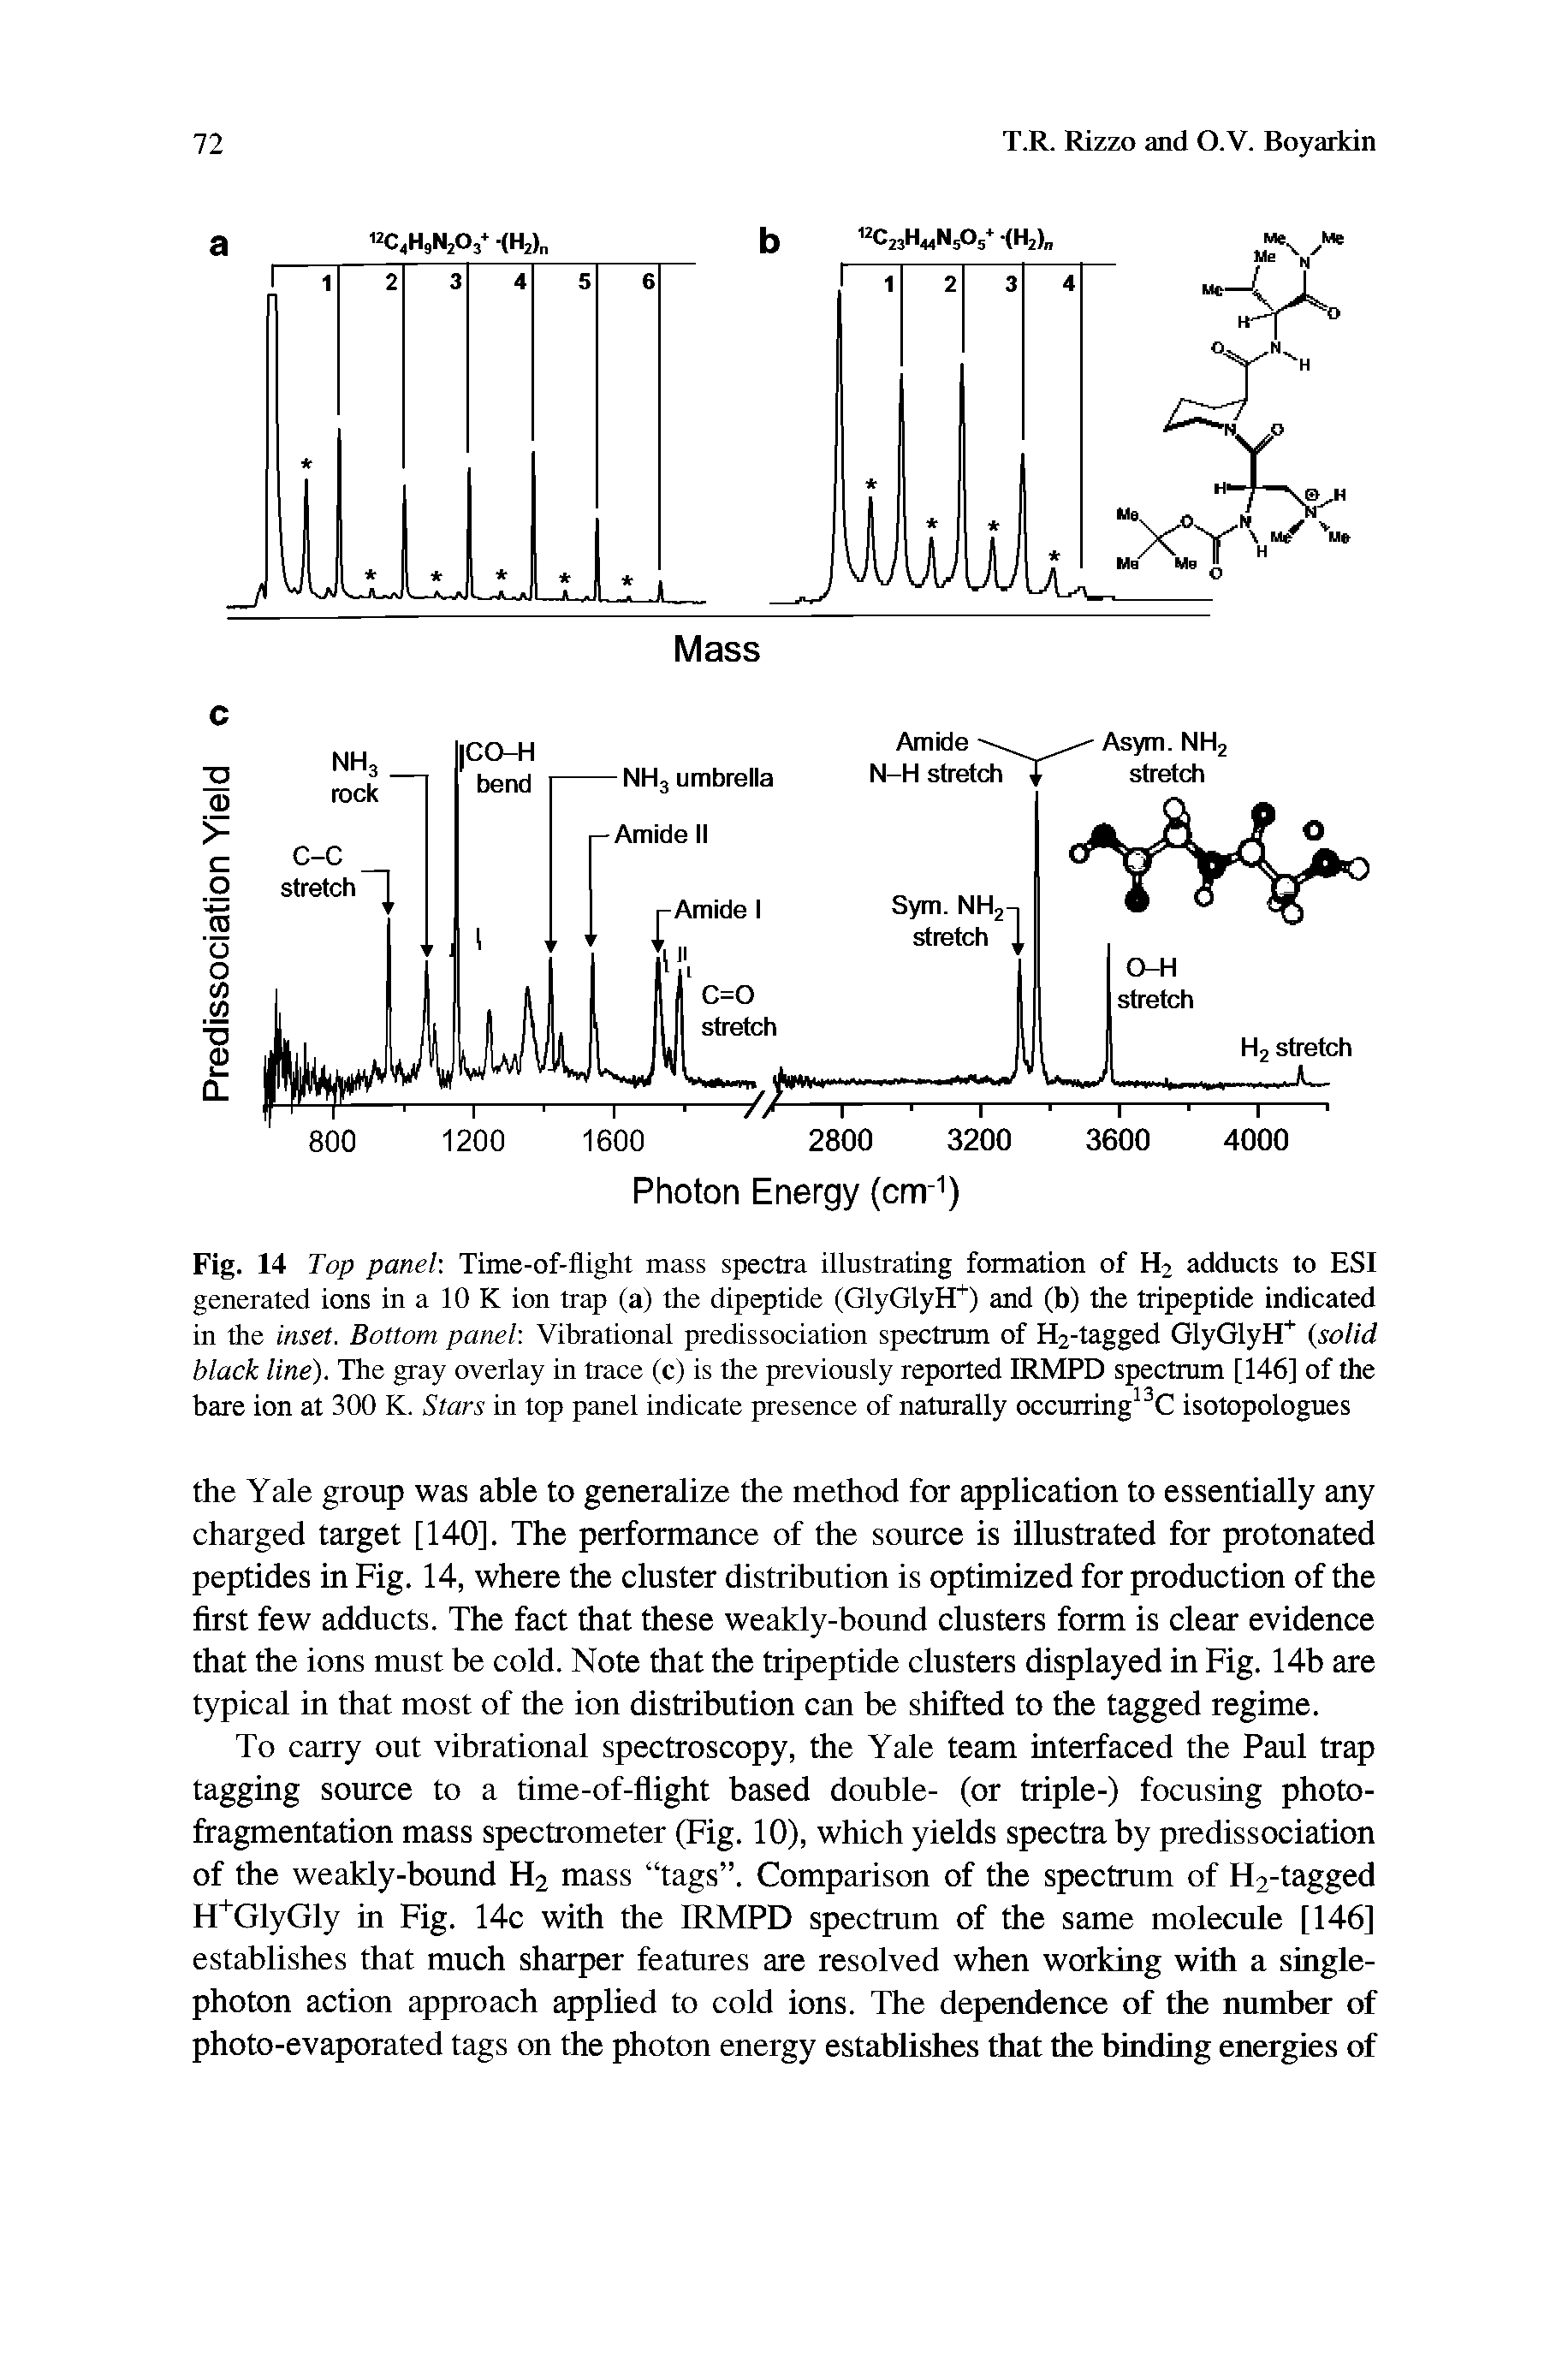 Fig. 14 Top panel. Time-of-flight mass spectra illustrating formation of H2 adducts to ESI generated ions in a 10 K ion trap (a) the dipeptide (GlyGlyH ) and (b) the tripeptide indicated in the inset. Bottom panel. Vibrational predissociation spectrum of H2-tagged GlyGlyH (solid black line). The gray overlay in trace (c) is the previously reported IRMPD spectrum [146] of the bare ion at 300 K. Stars in top panel indicate presence of naturally occurring C isotopologues...